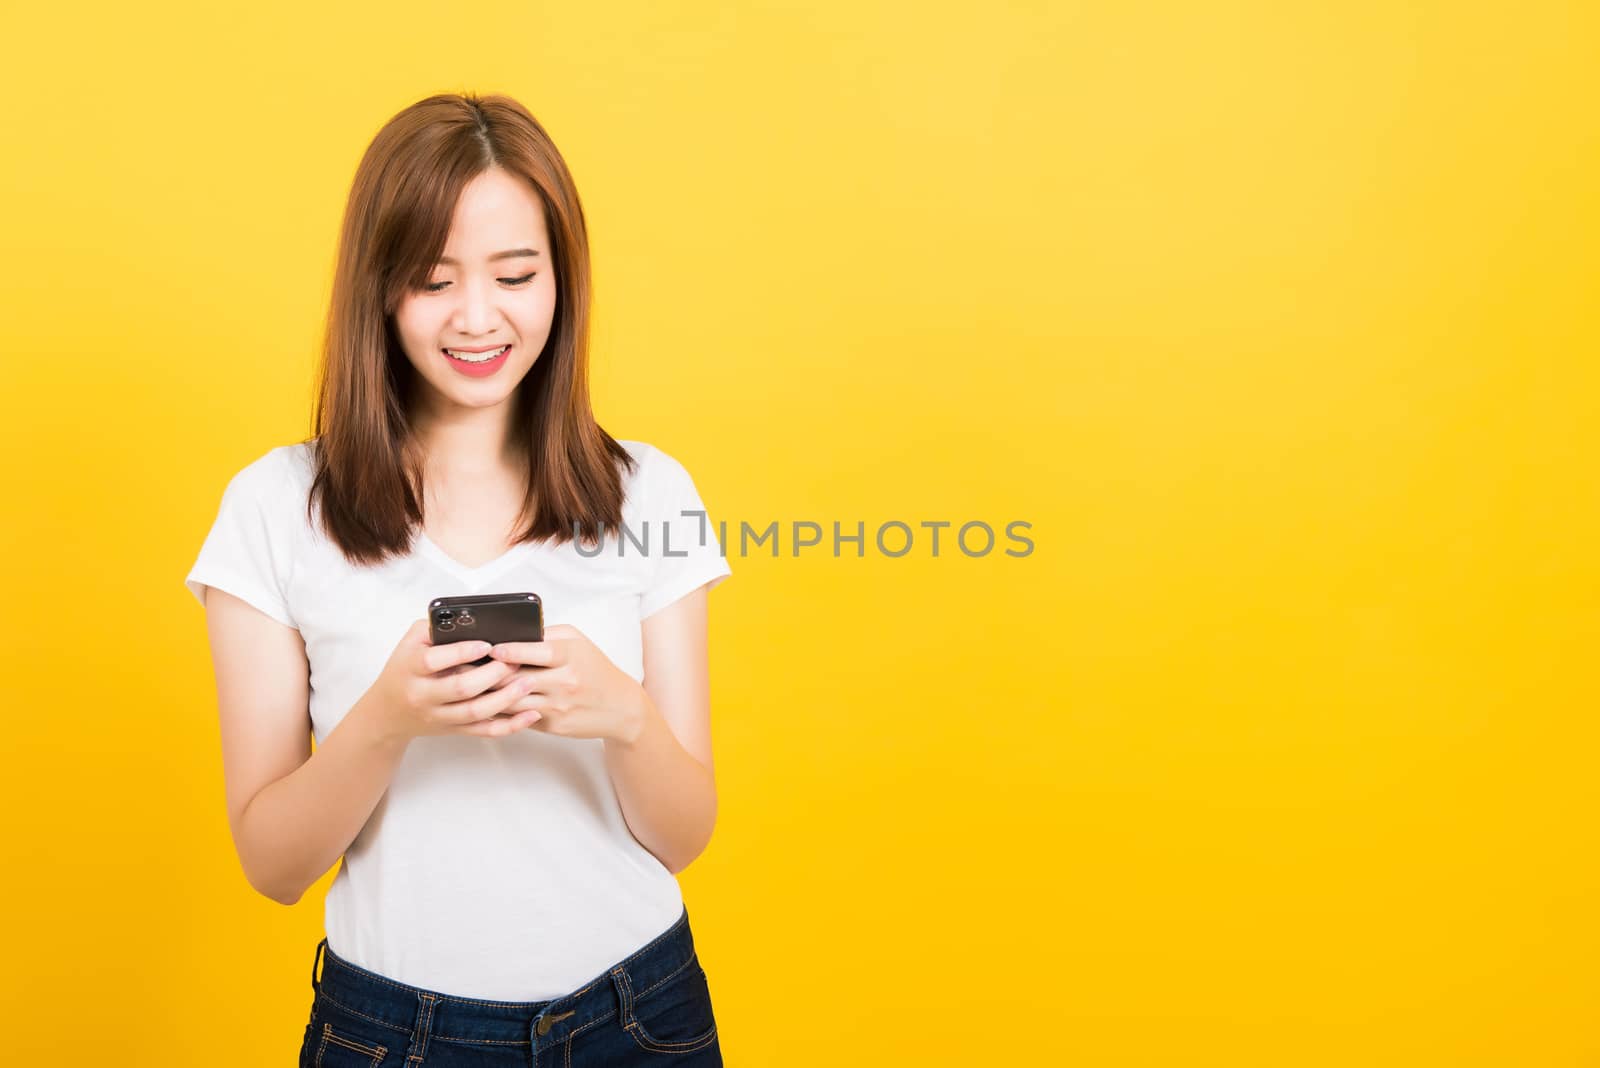 Asian happy portrait beautiful cute young woman teen smile standing playing game or writing message on smartphone looking to the phone isolated, studio shot on yellow background with copy space